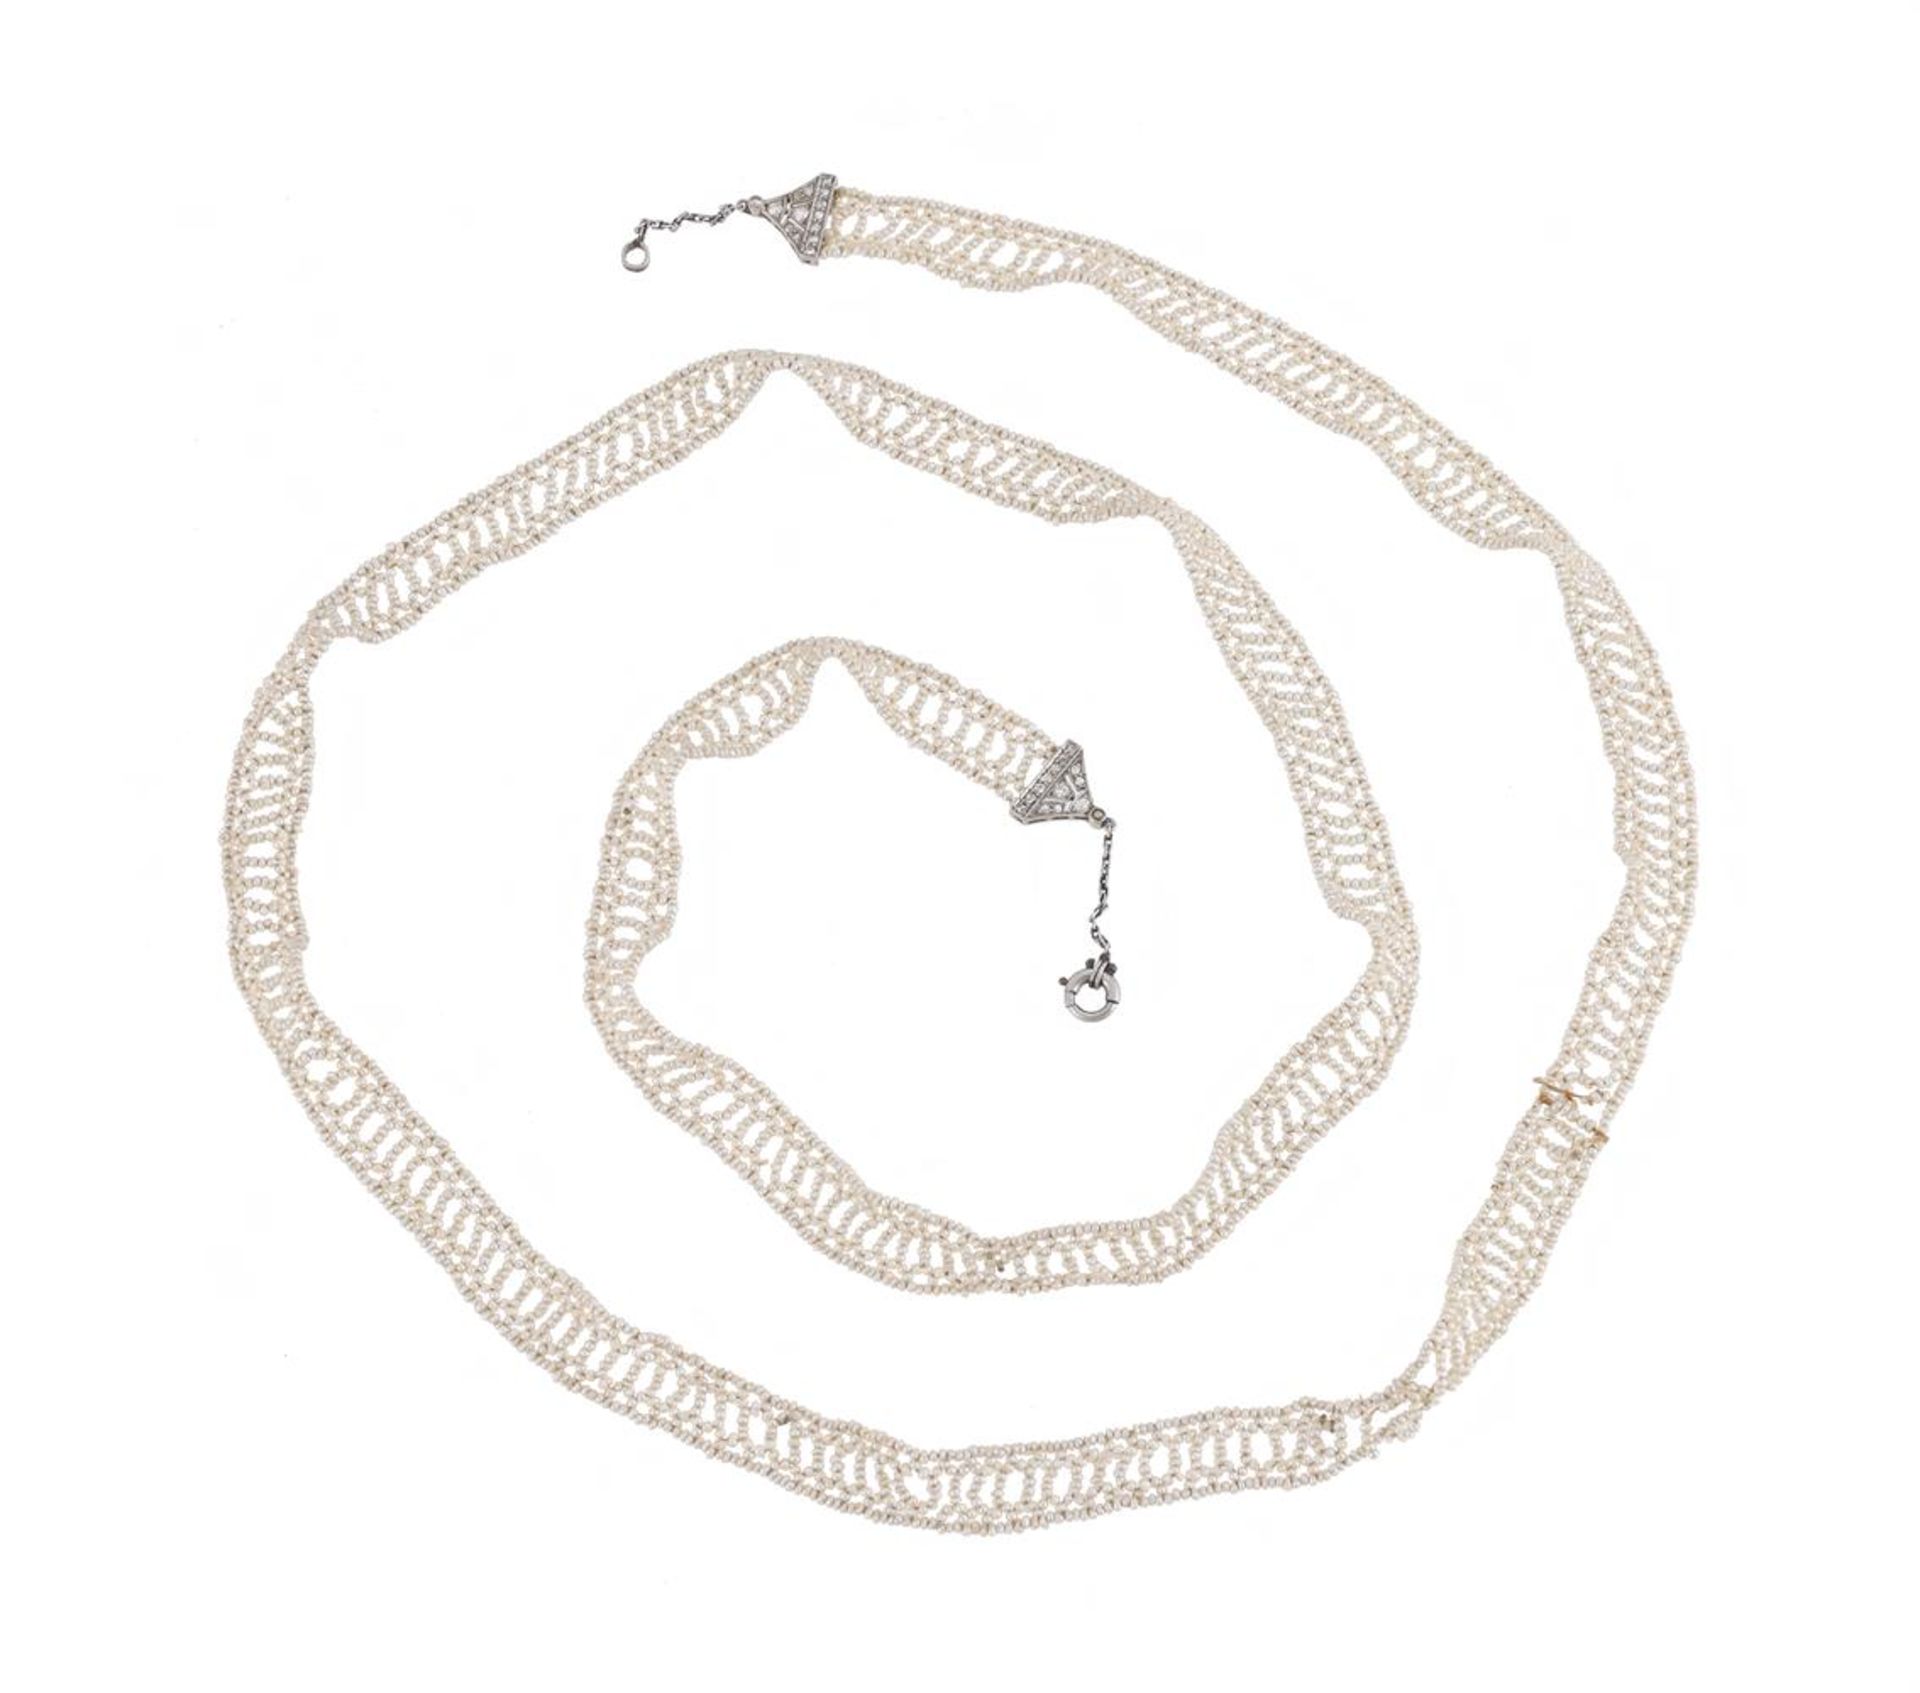 A 1920S SEED PEARL NECKLACE WITH DIAMOND SET TERMINALS